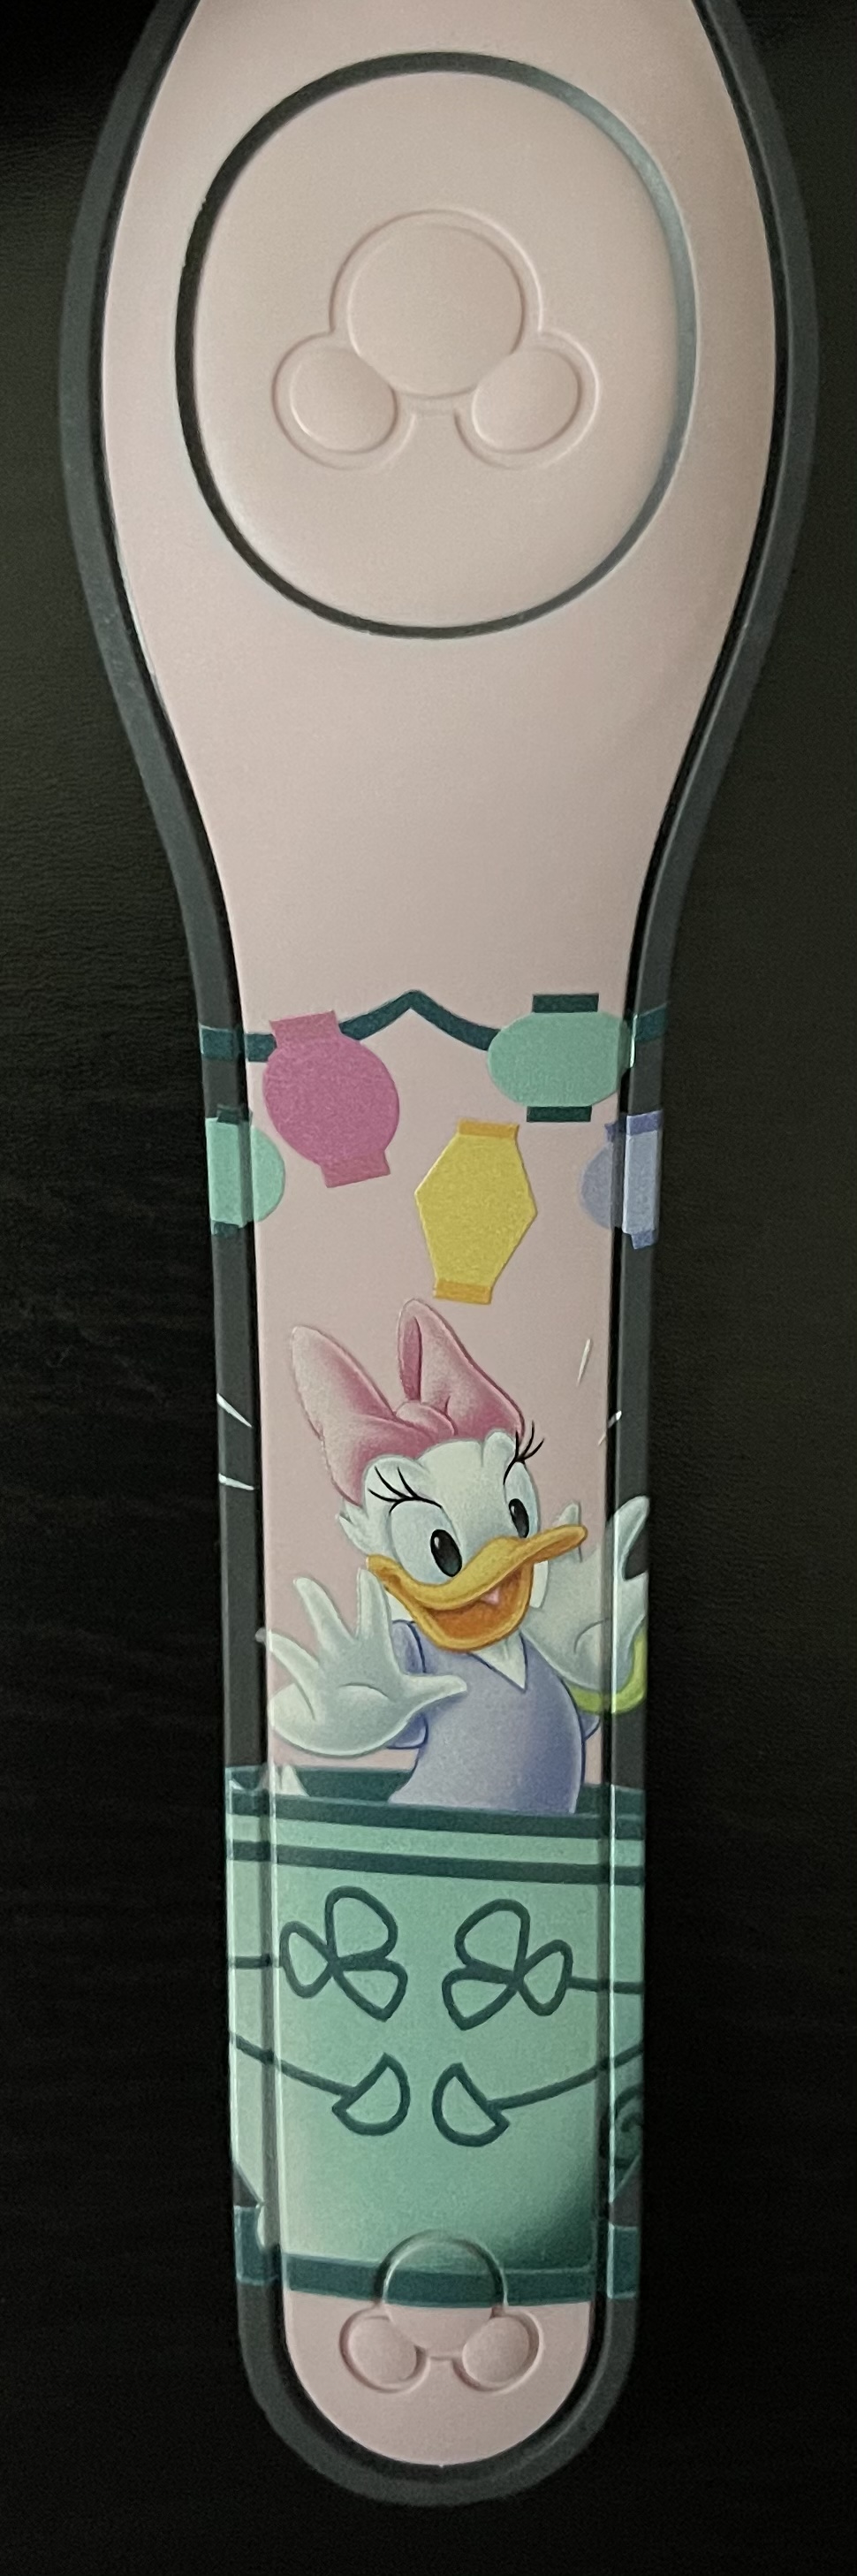 Daisy Duck Annual Passholder 2021 Limited Release MagicBand is now out for purchase